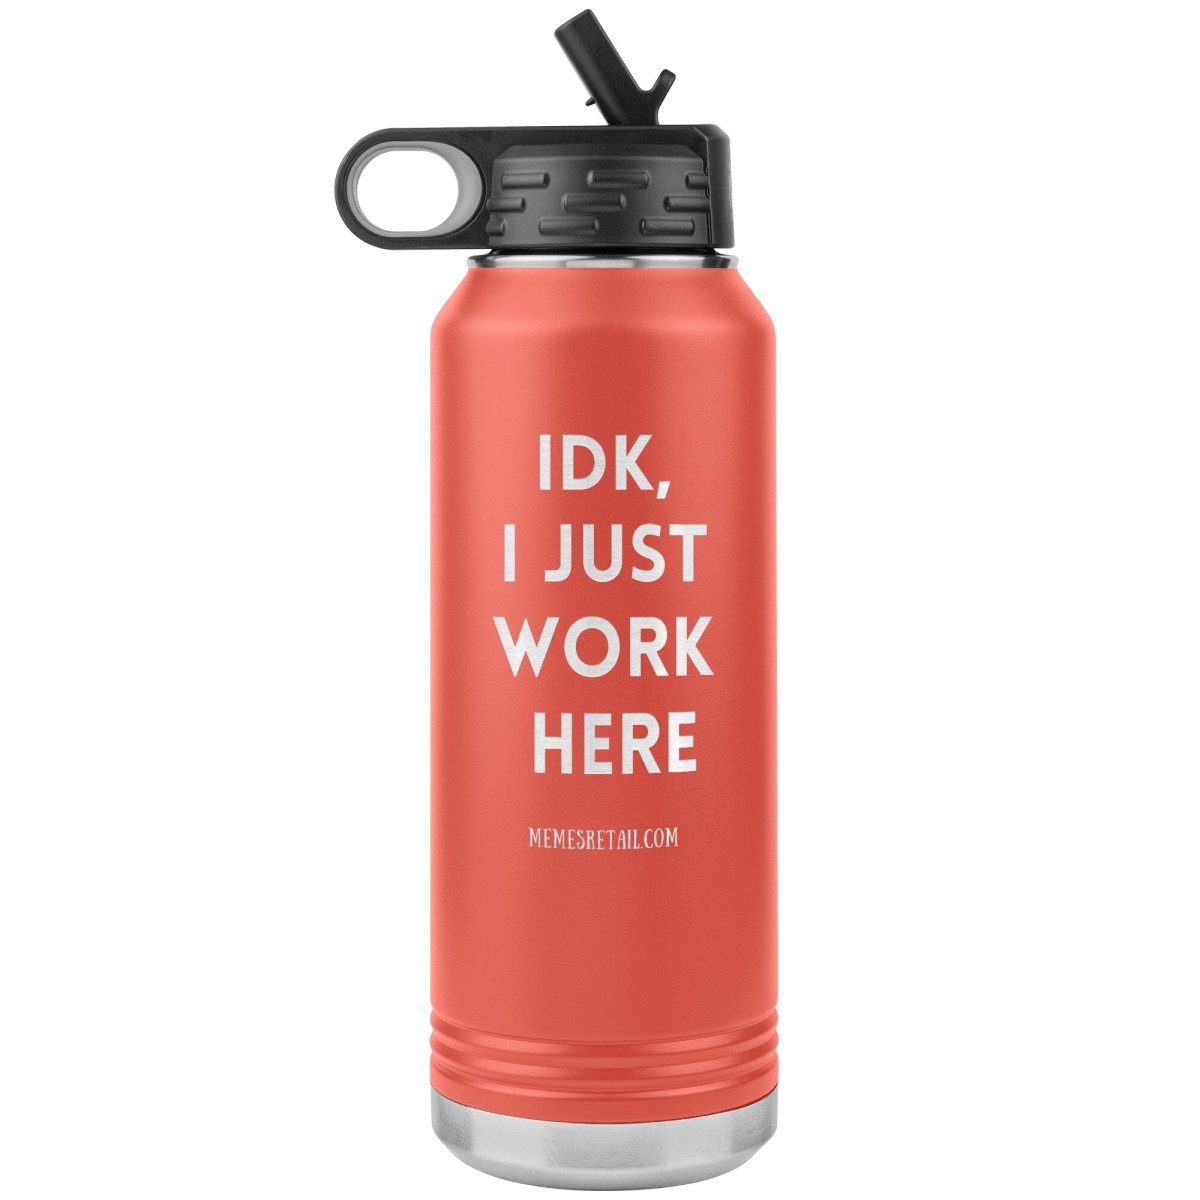 IDK, I Just Work Here 32 oz Stainless Steel Water Bottle Tumbler, Coral - MemesRetail.com